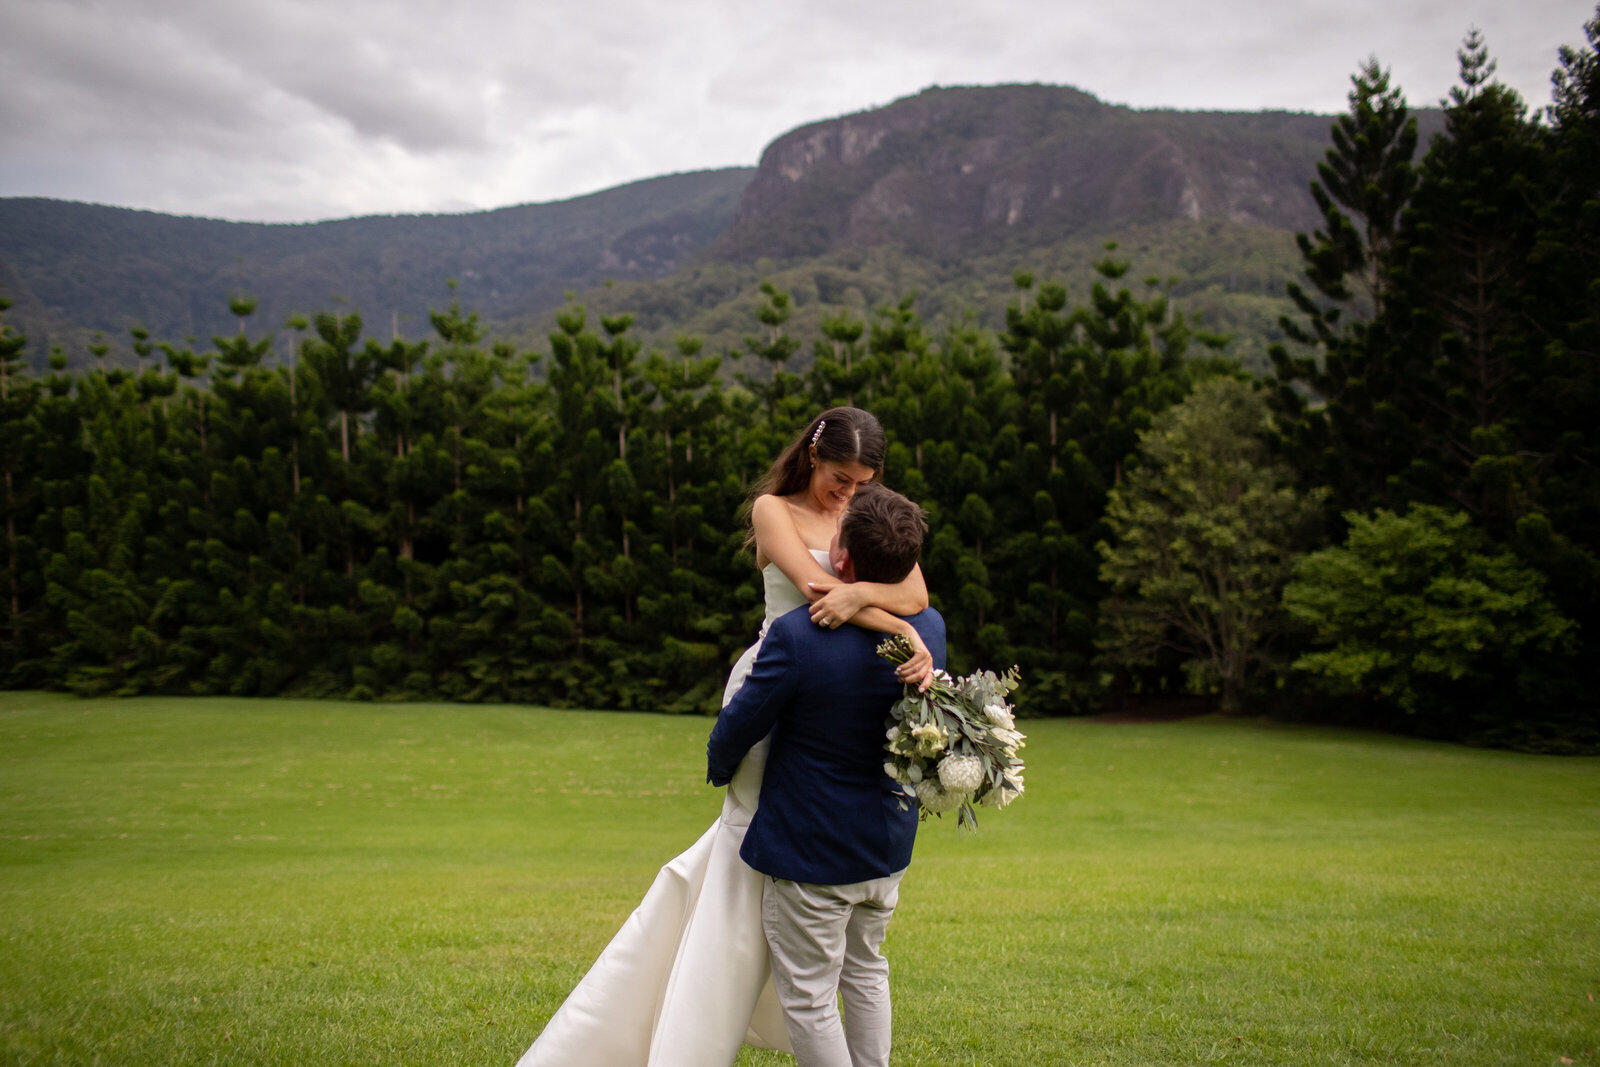 Groom lifts up bride and twirls in the mountain